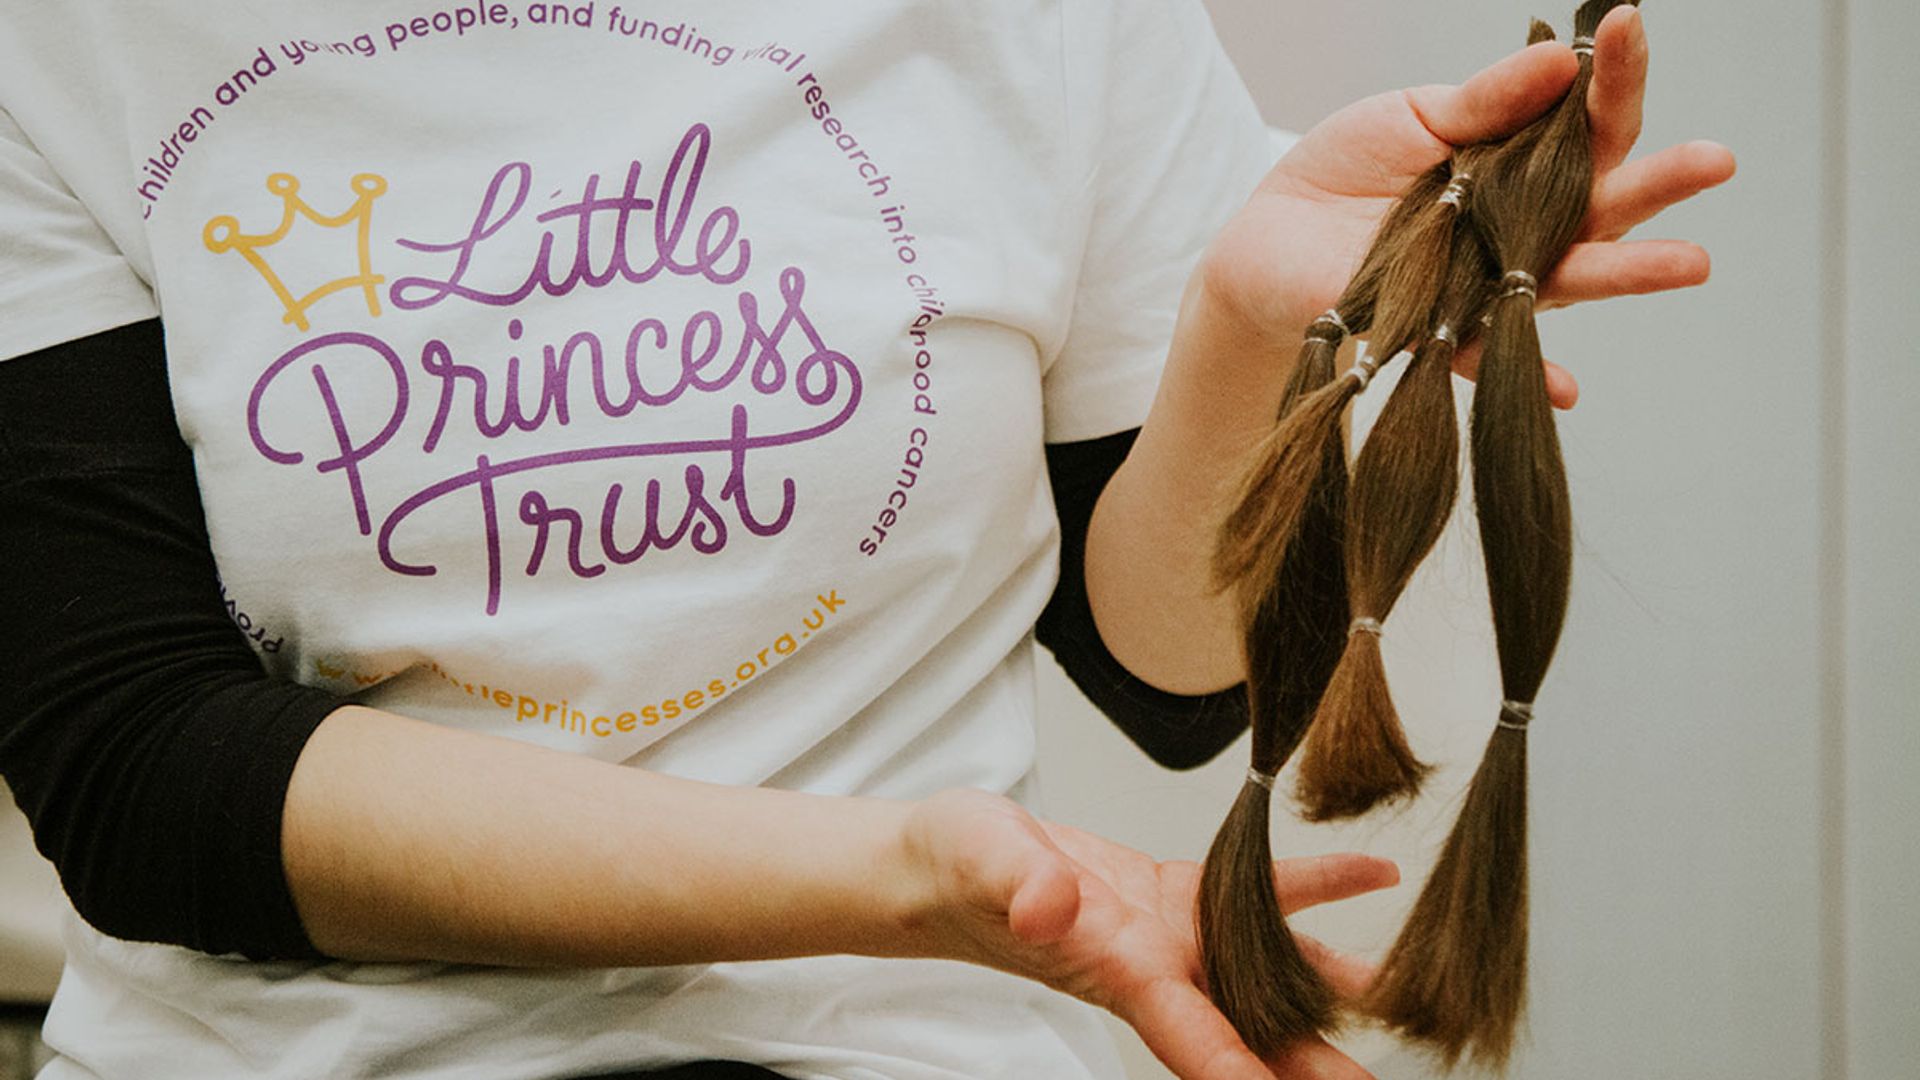 John Frieda partners with Little Princess Trust to encourage hair donations